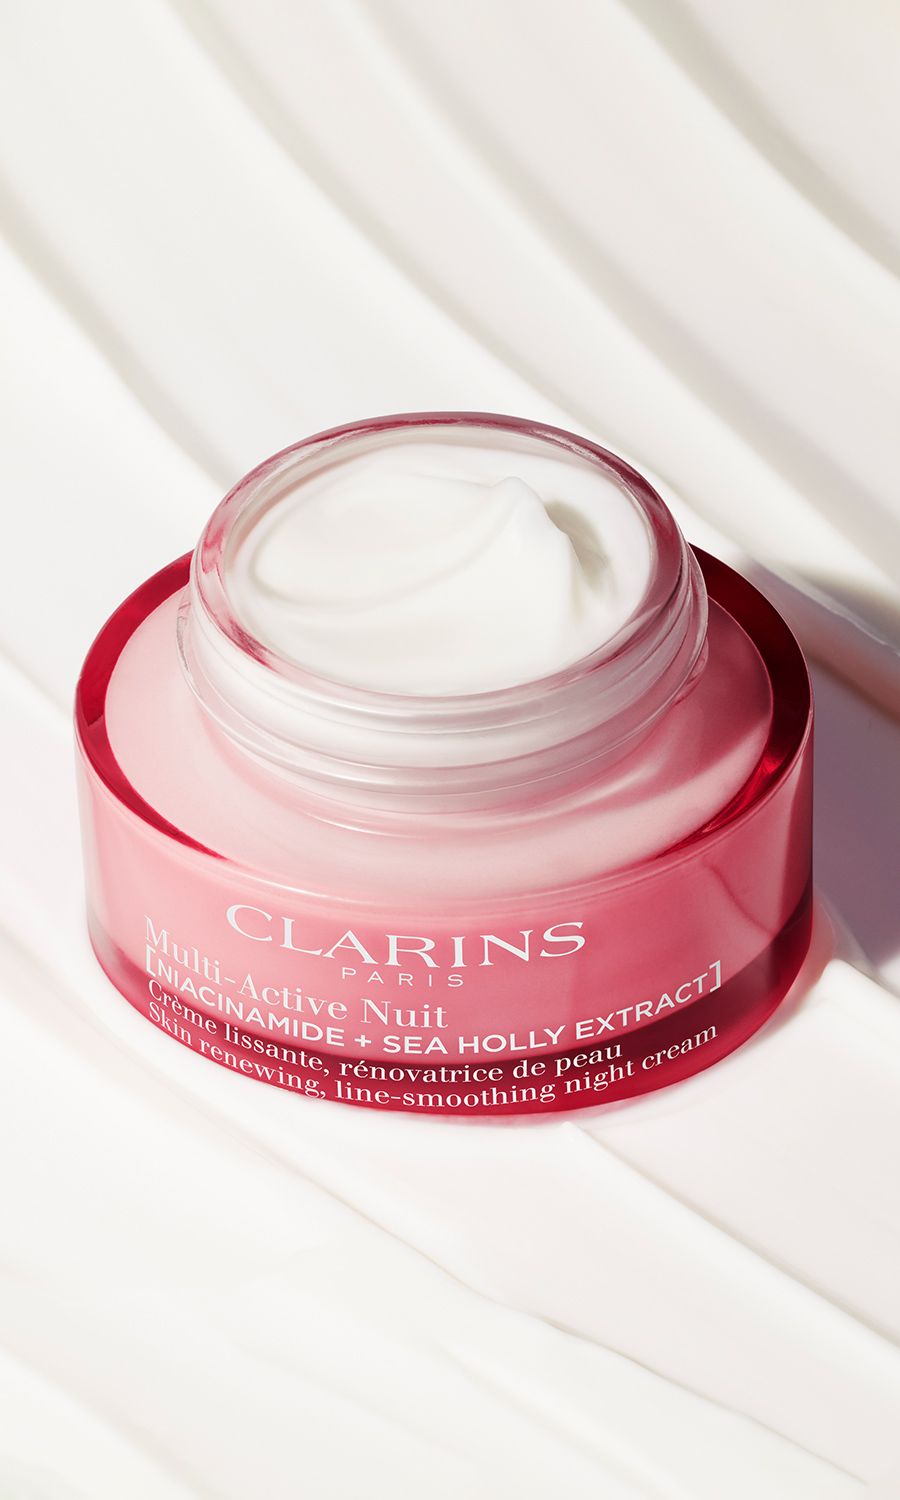 On trial: Clarins most hotly anticipated moisturiser sets